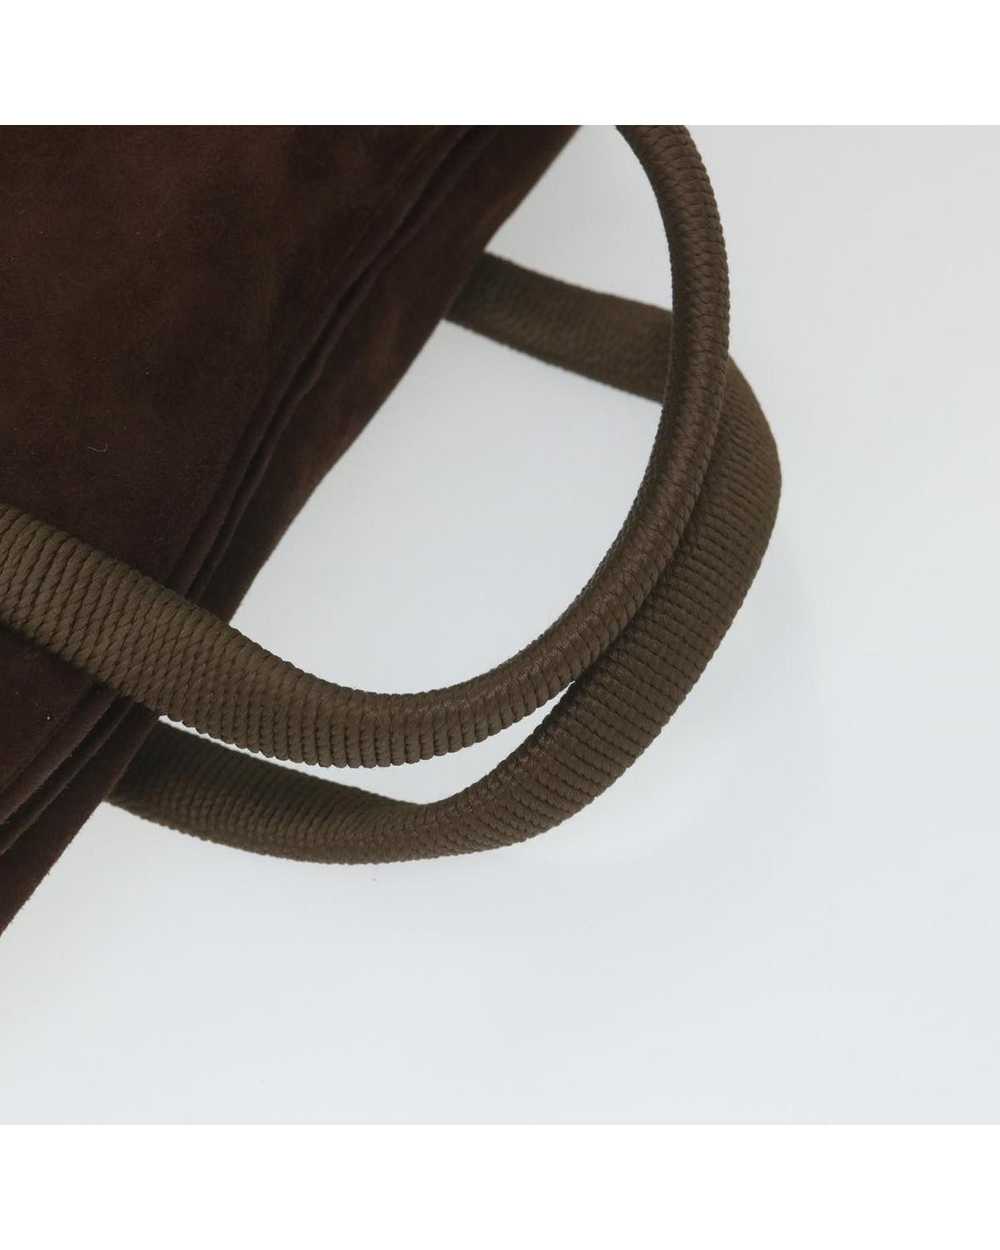 Prada Brown Suede Hand Bag with Accessories and I… - image 7